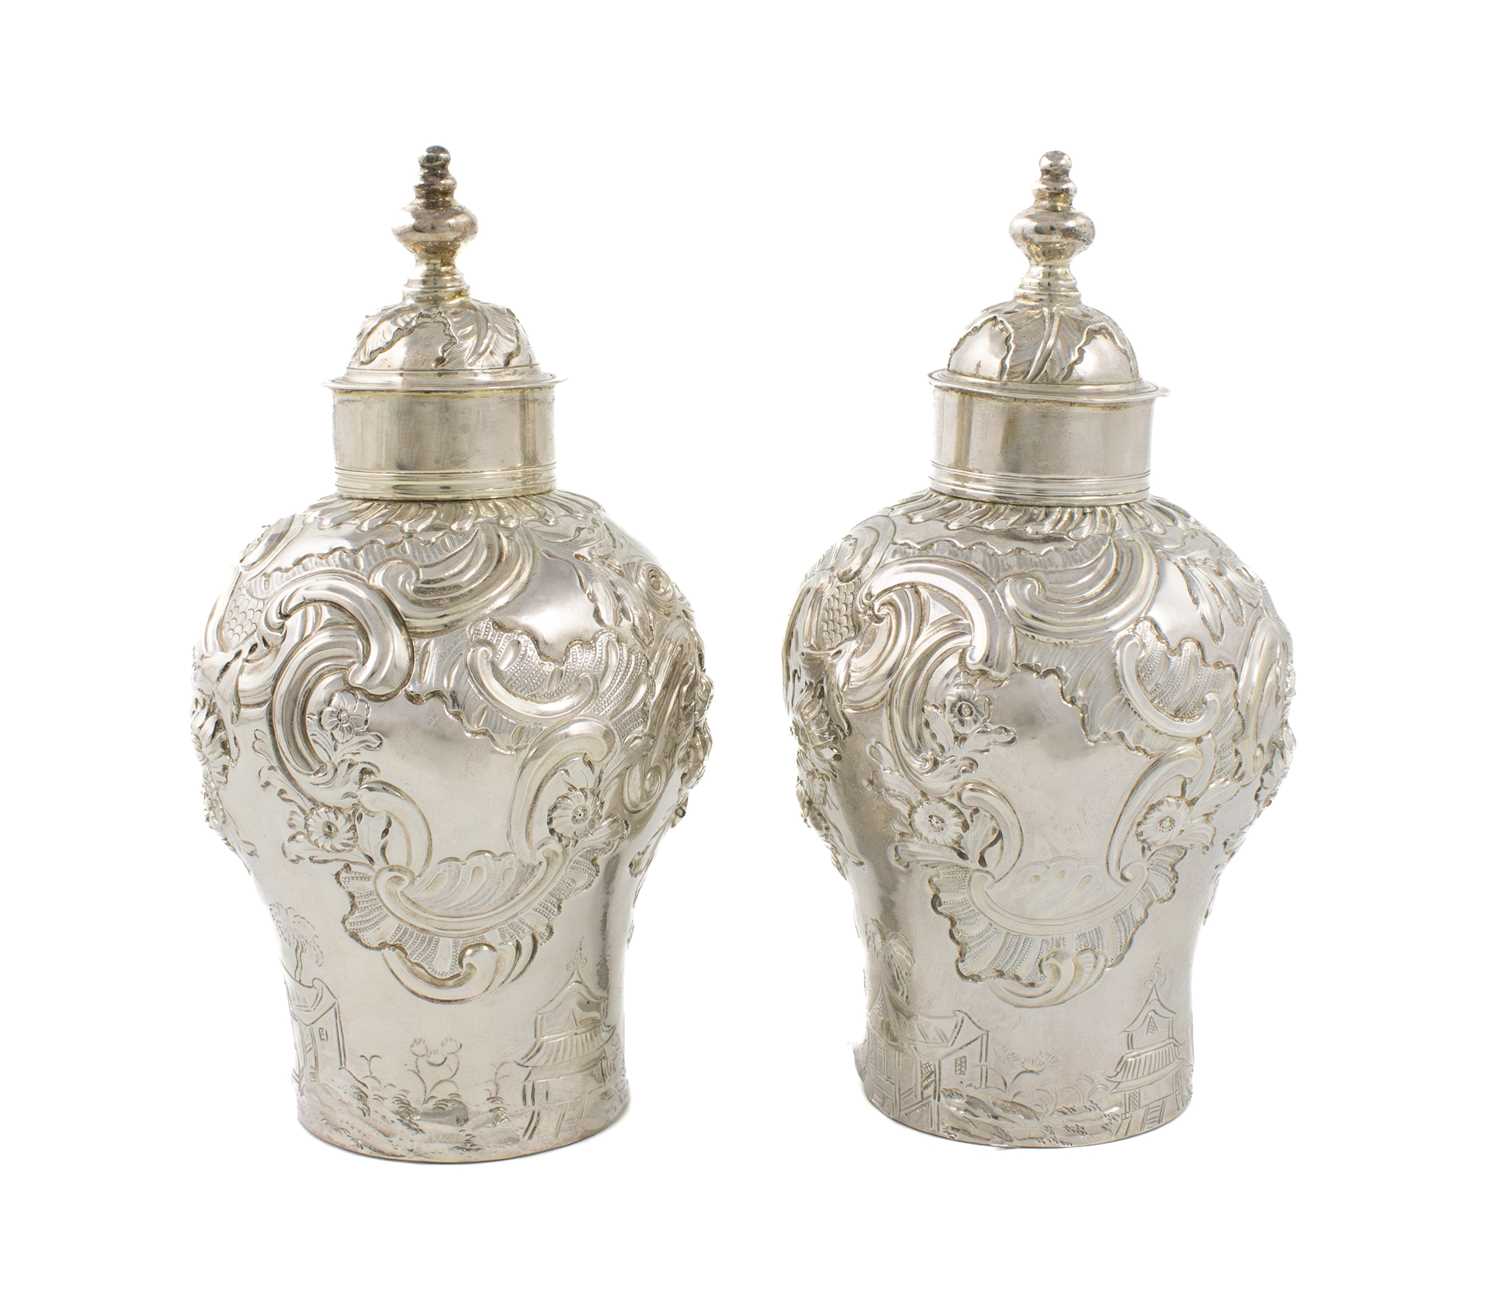 A pair of George II silver chinoiserie tea caddies, marked WM, London 1753, baluster form, decorated